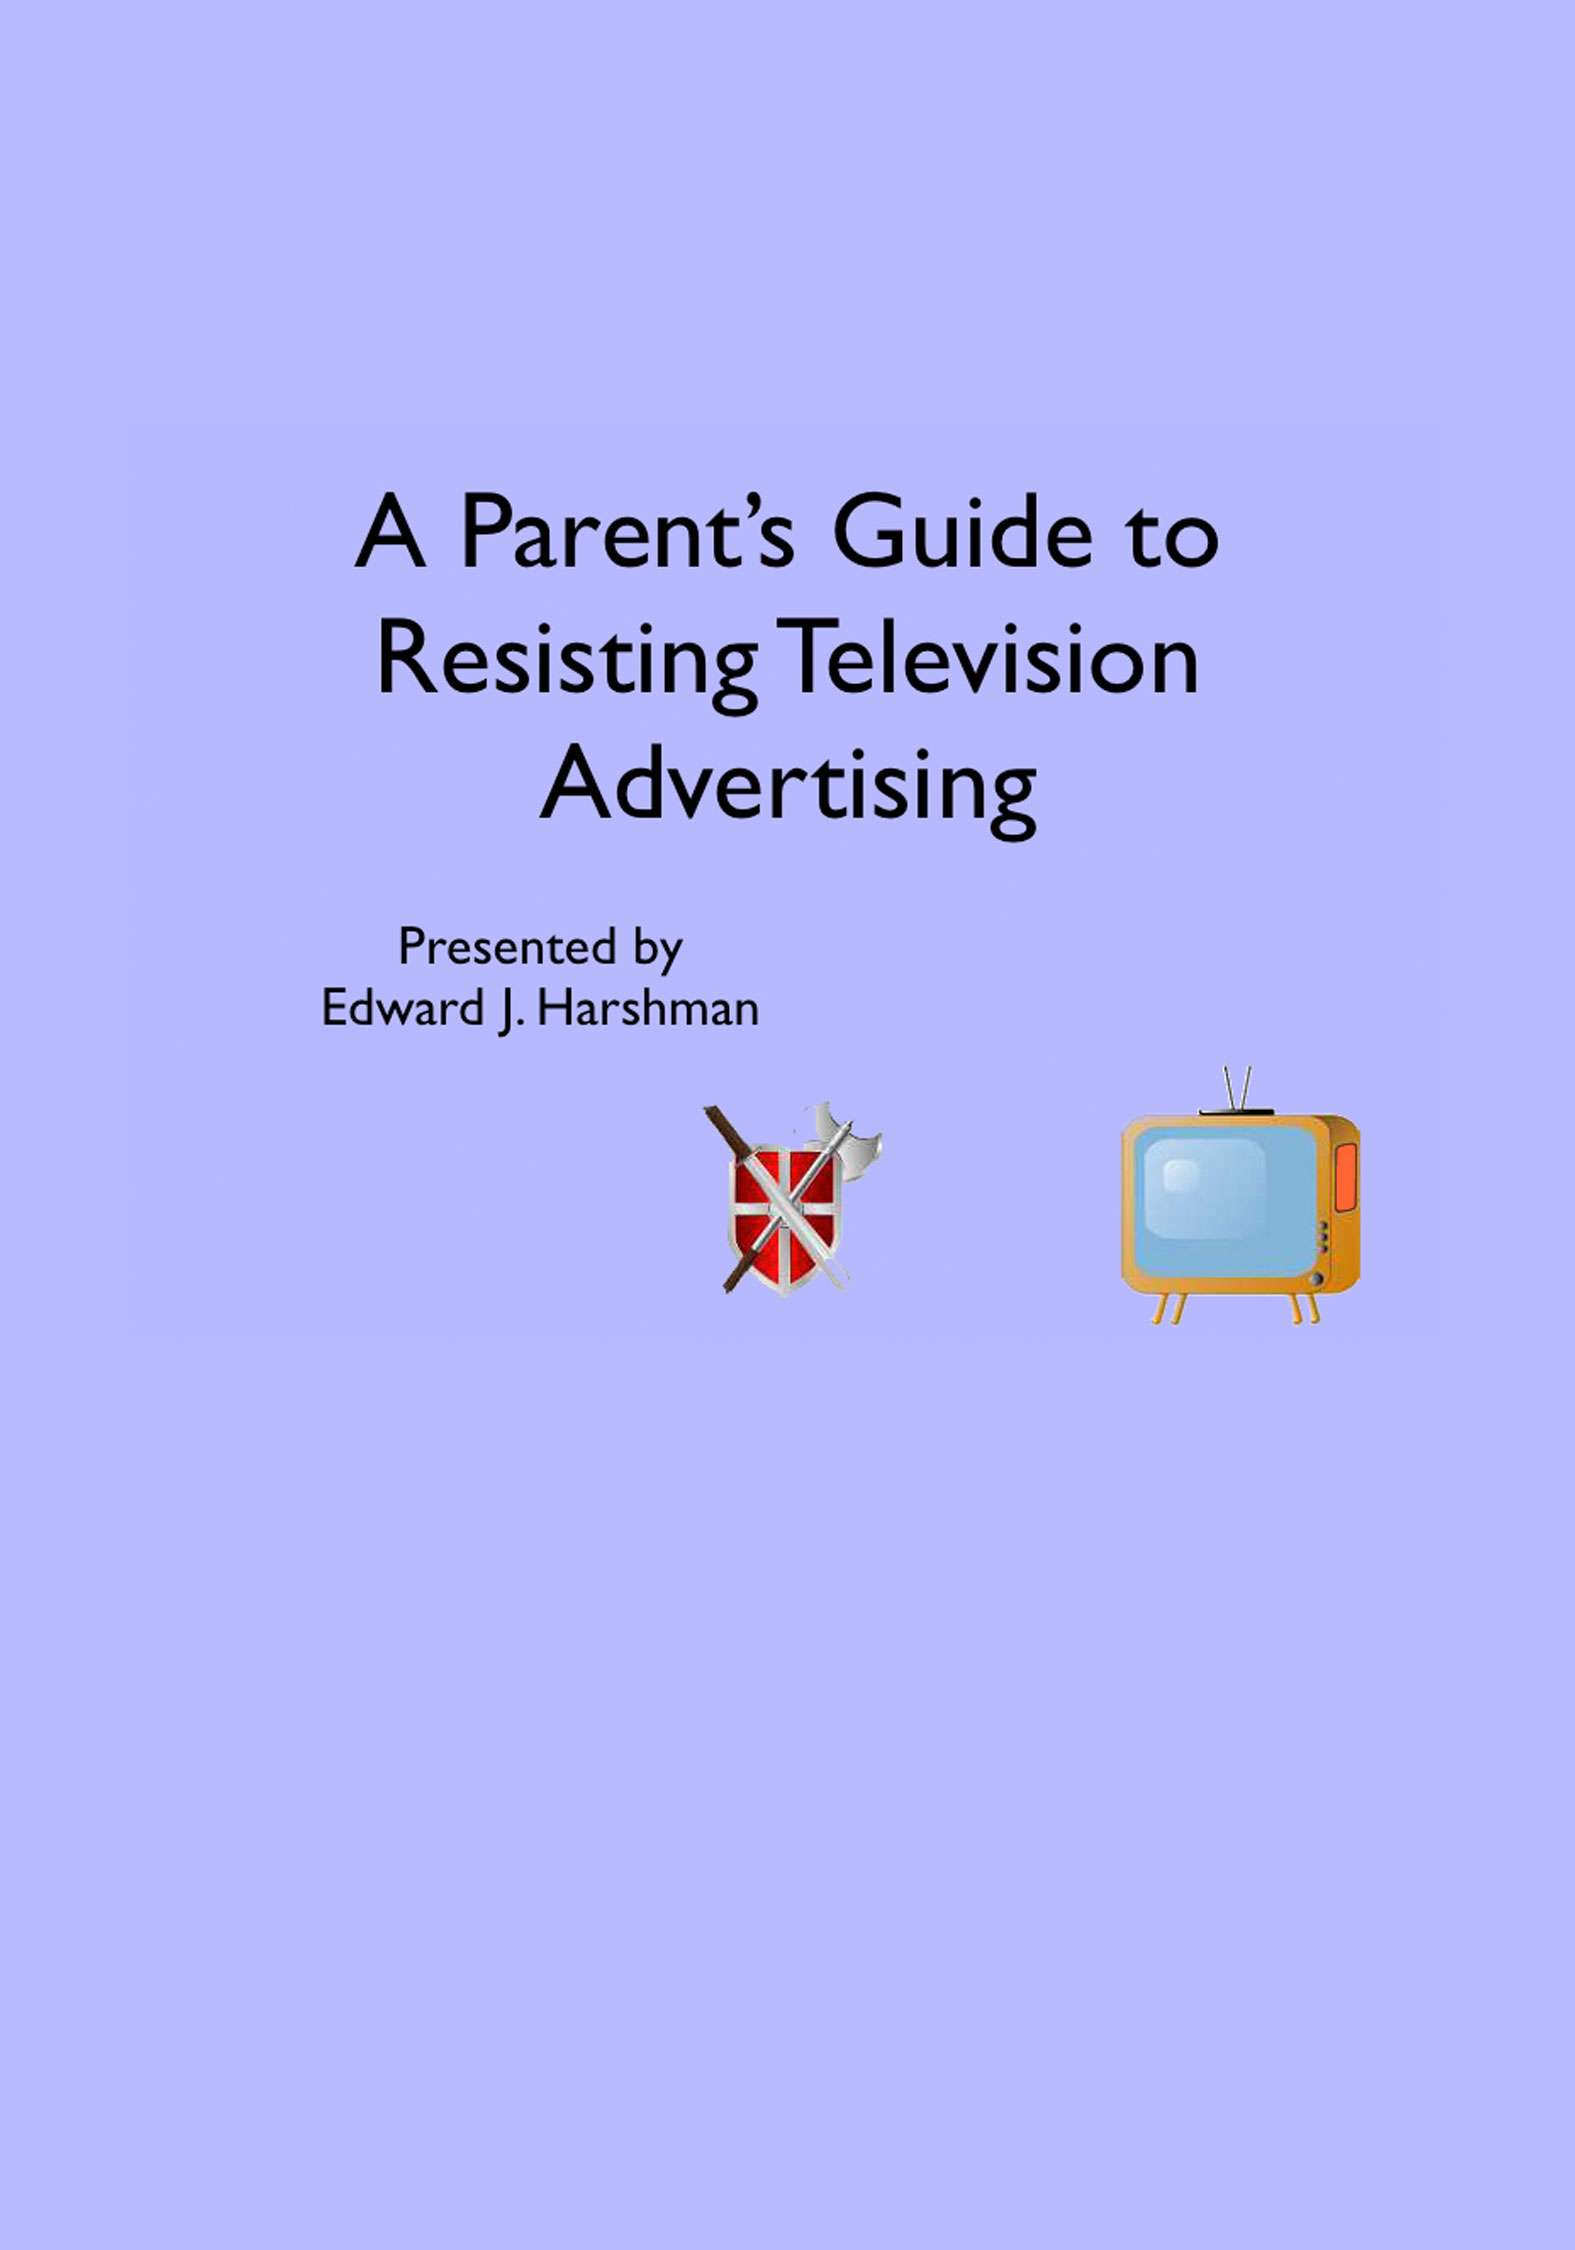 A Parent's Guide to Resisting Advertising